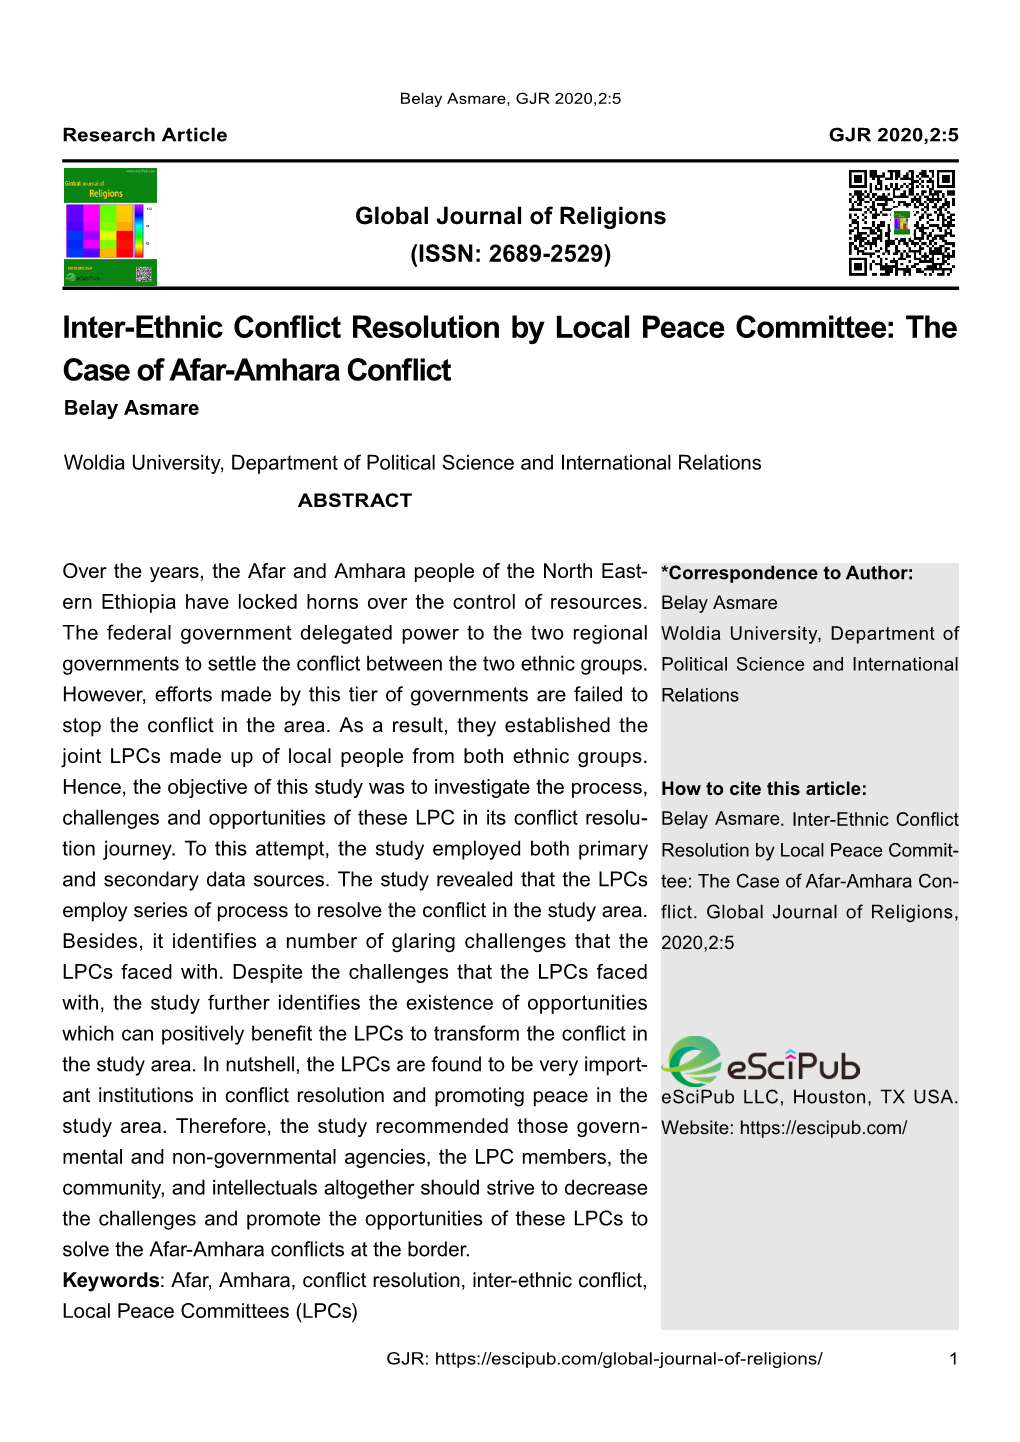 Inter-Ethnic Conflict Resolution by Local Peace Committee: the Case of Afar-Amhara Conflict Belay Asmare